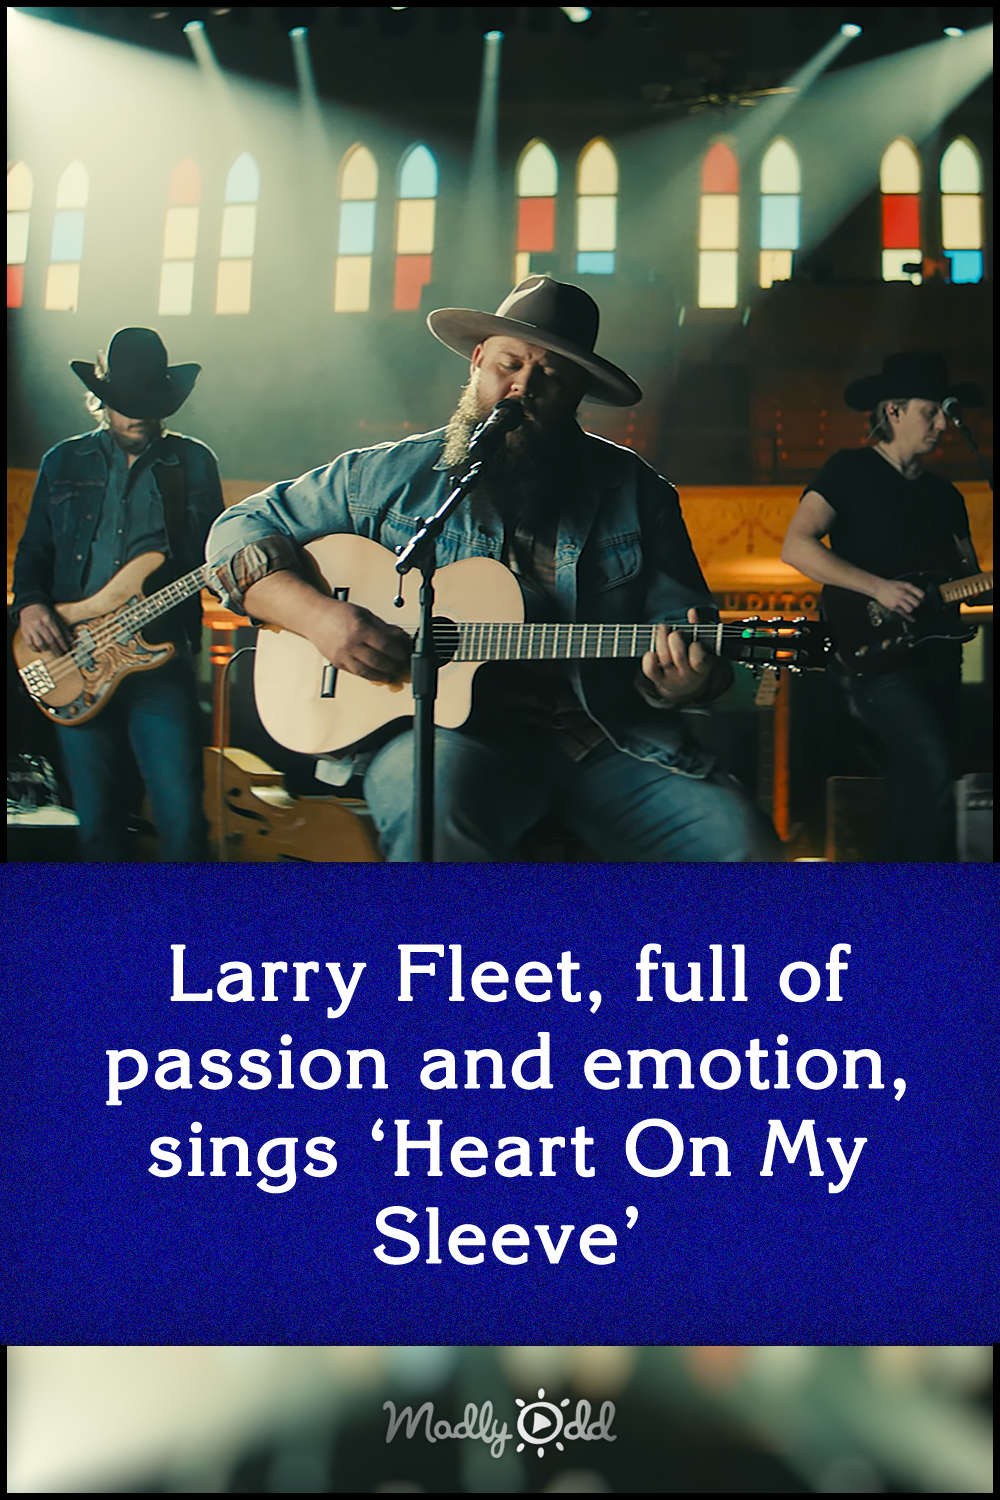 Larry Fleet, full of passion and emotion, sings ‘Heart On My Sleeve’